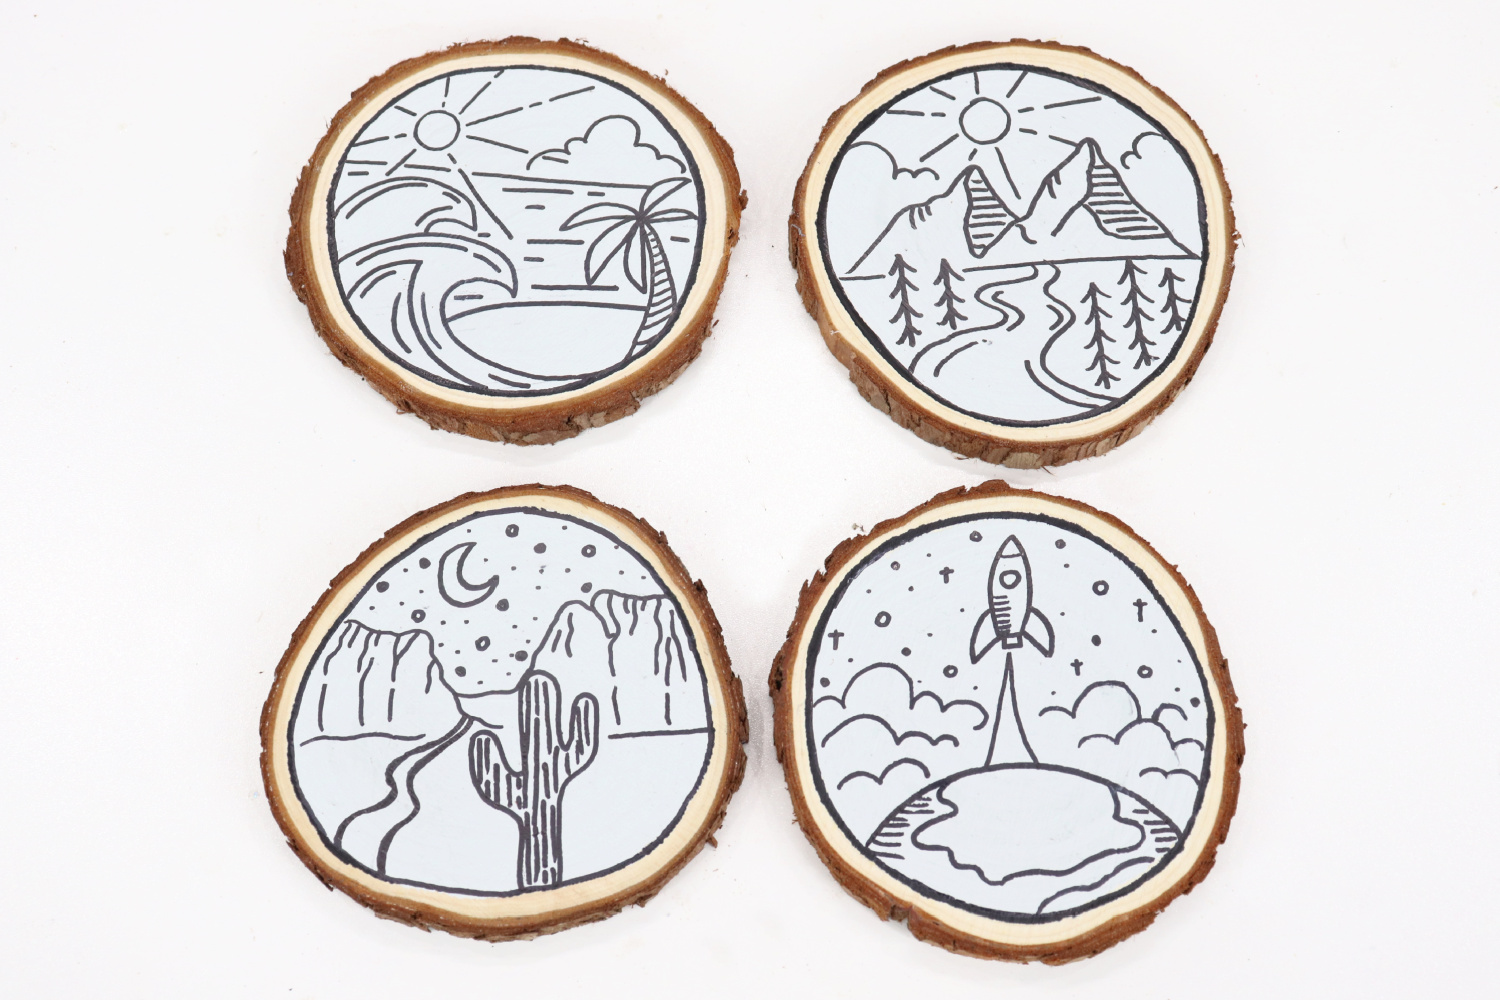 Image contains four monoline travel coasters: one is beach themed, one mountain themed, one desert themed, and one space themed, on a white background.